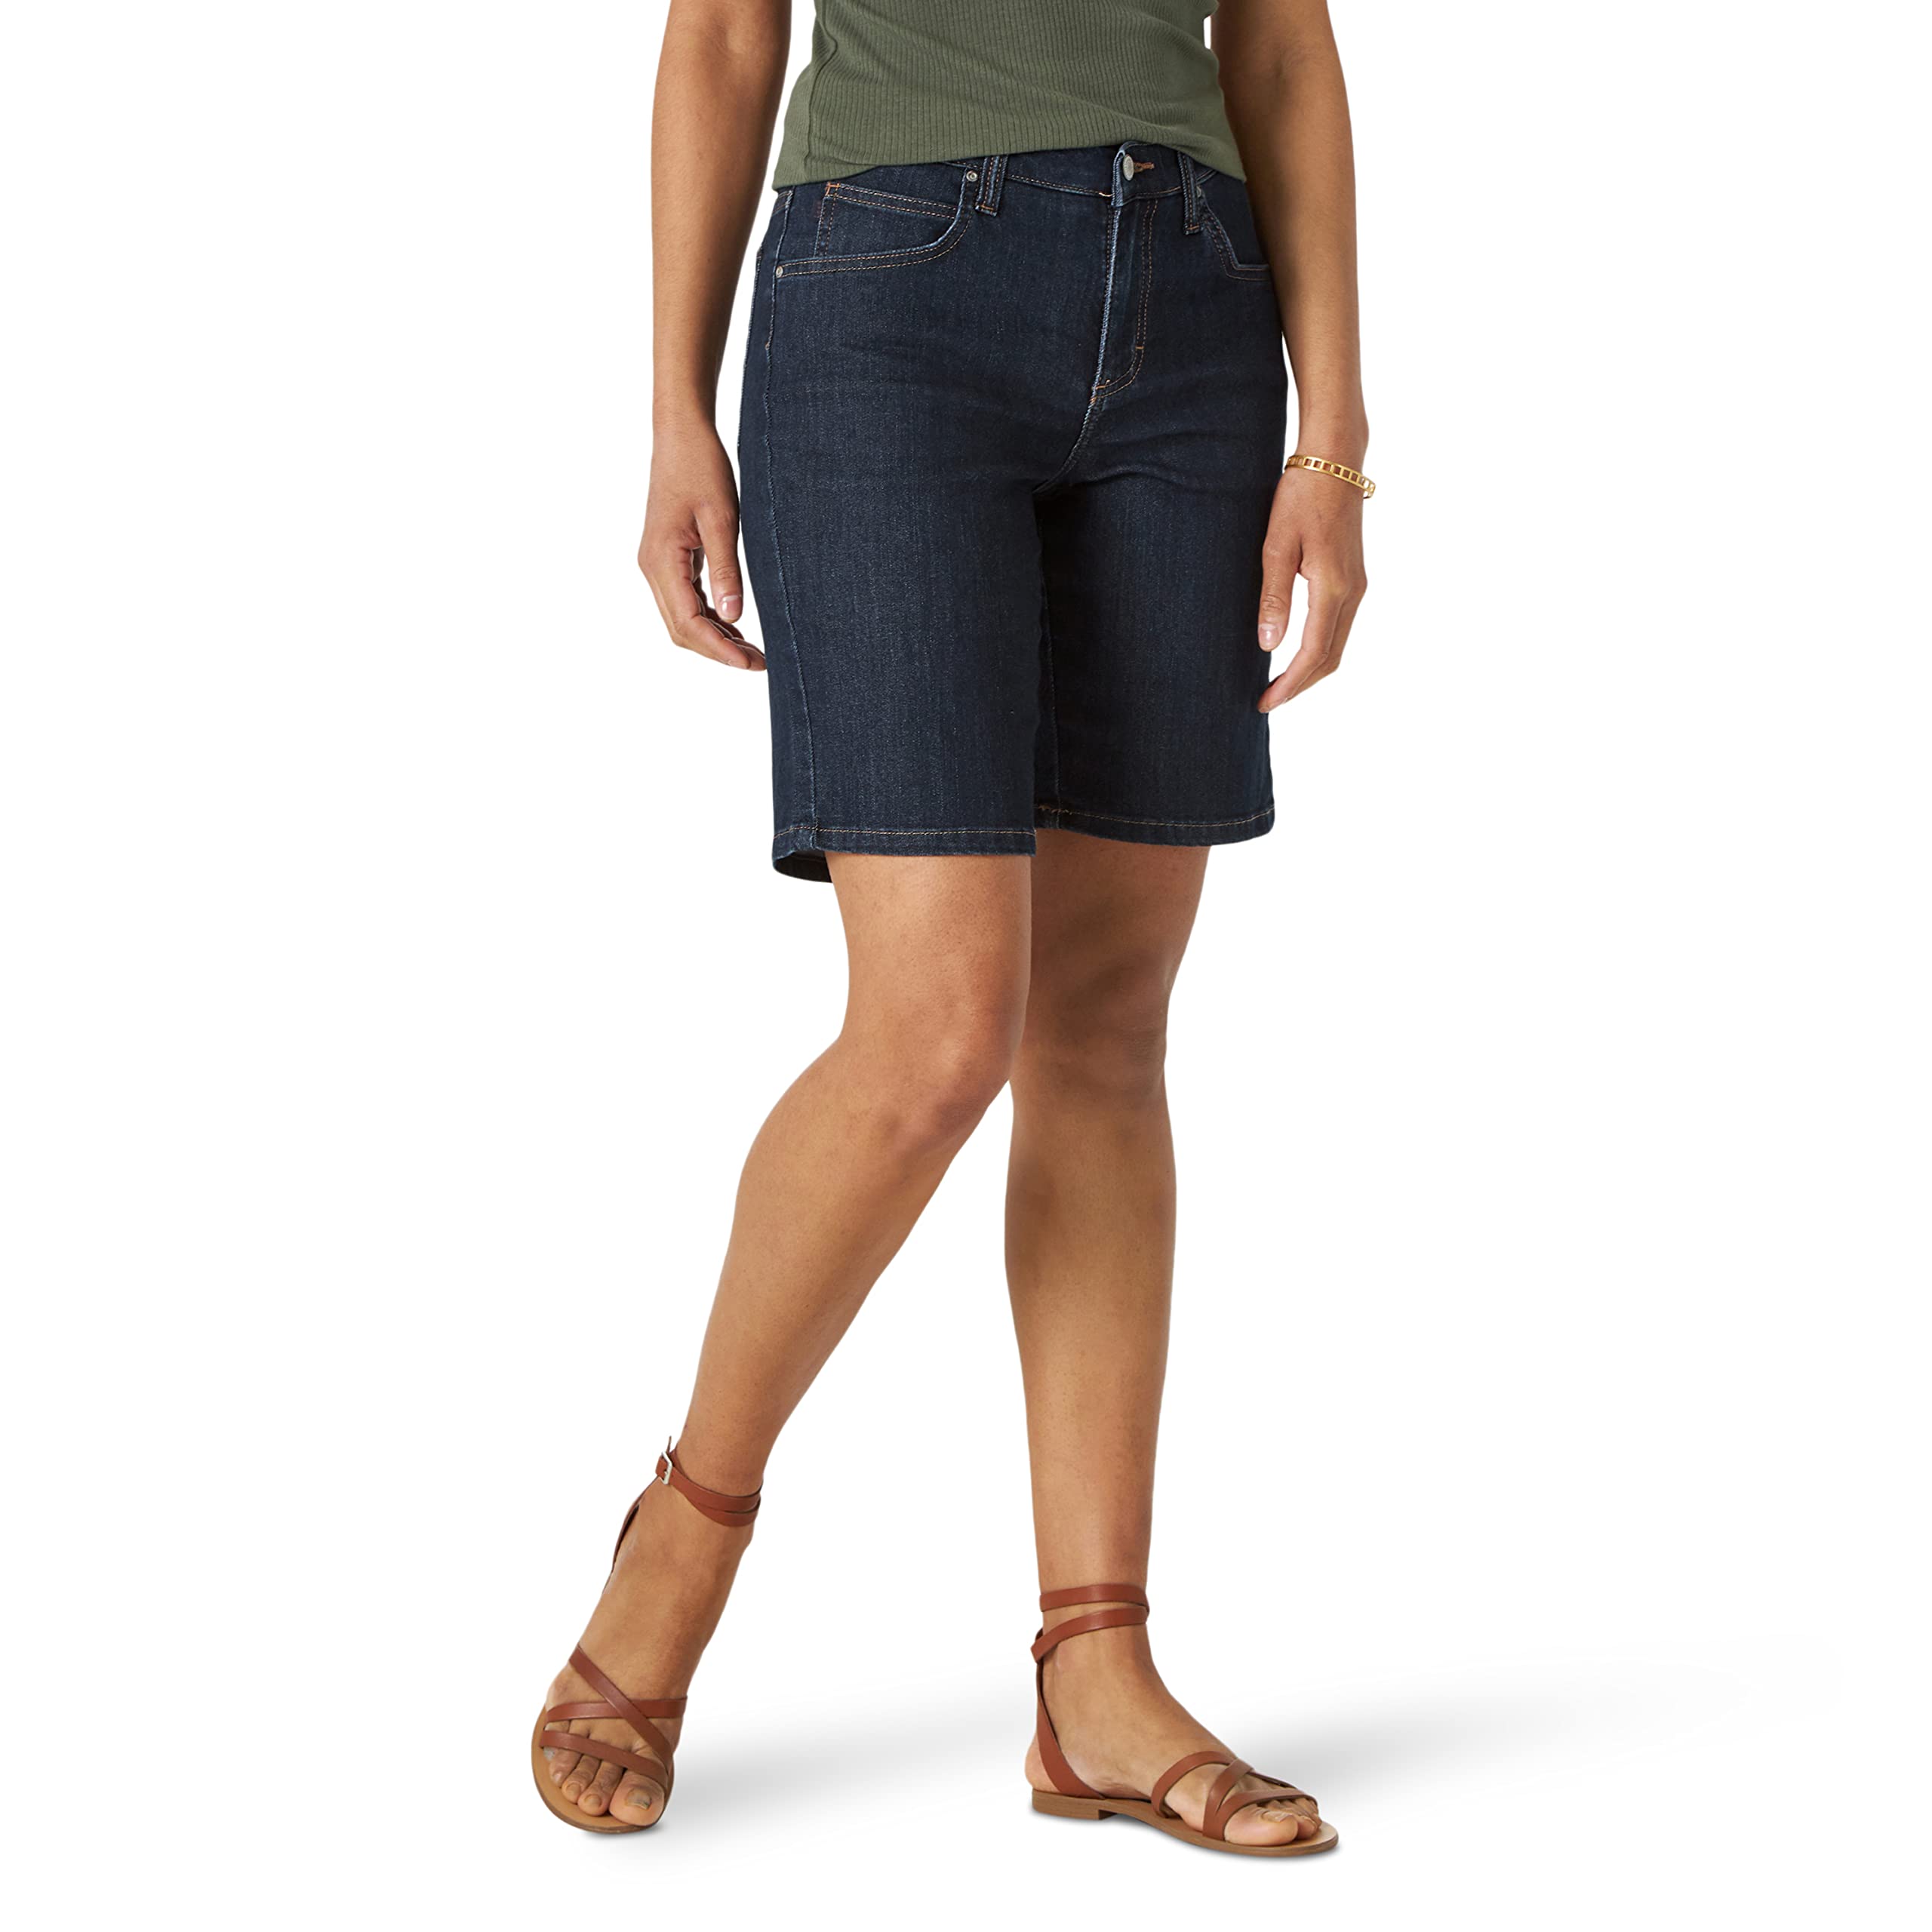 Lee Women's Relaxed Fit Bermuda Short (Lagoon or Journey) $13.80 + Free ...